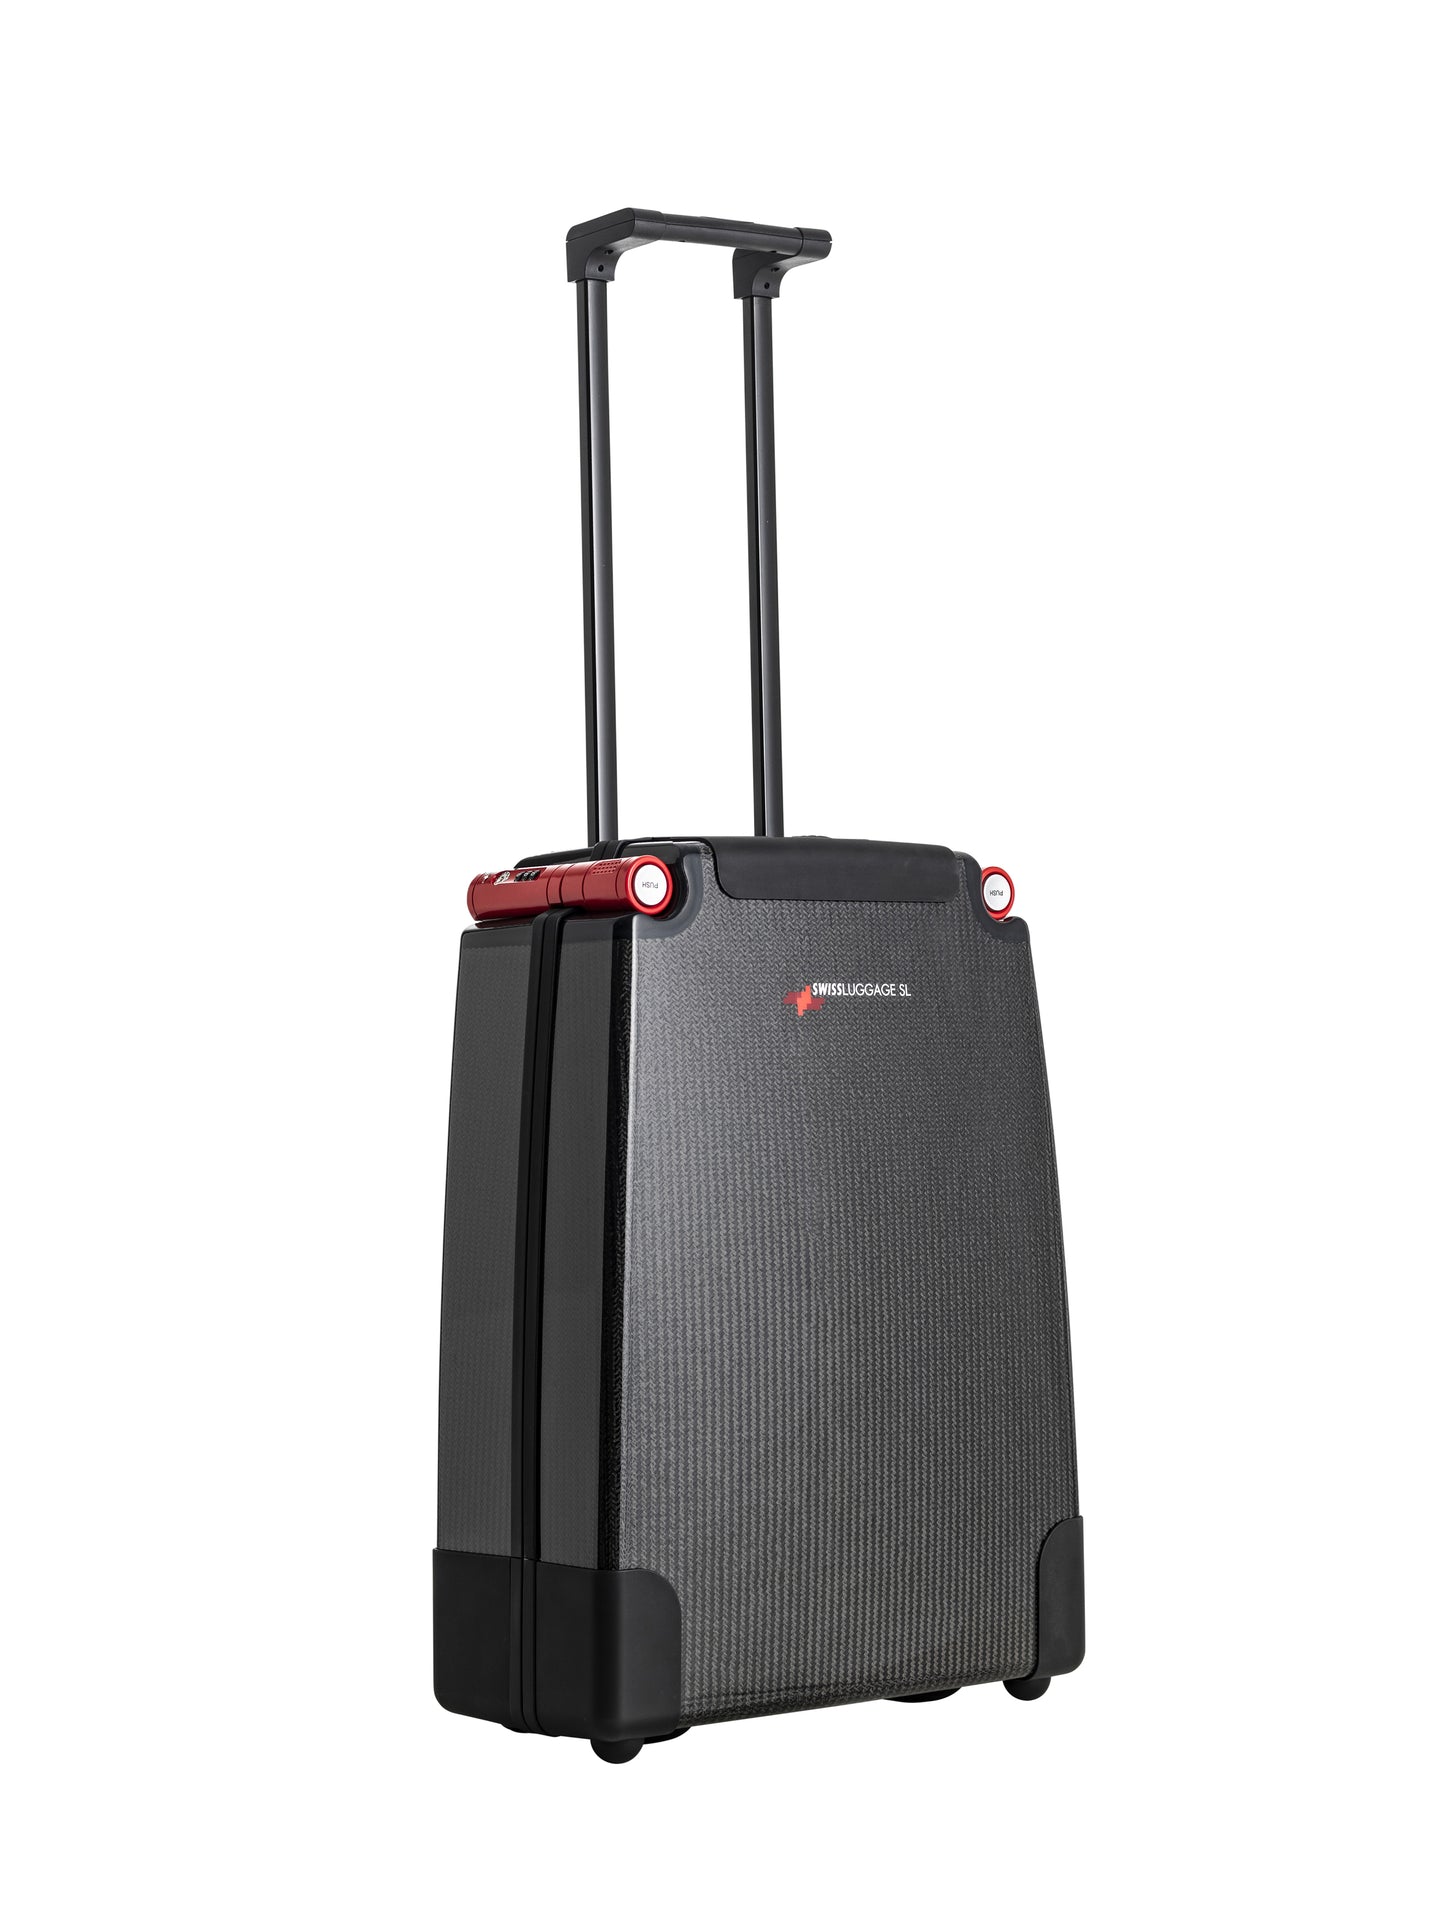 Swiss Luggage SL Grösse S - silber -The Fifity Five